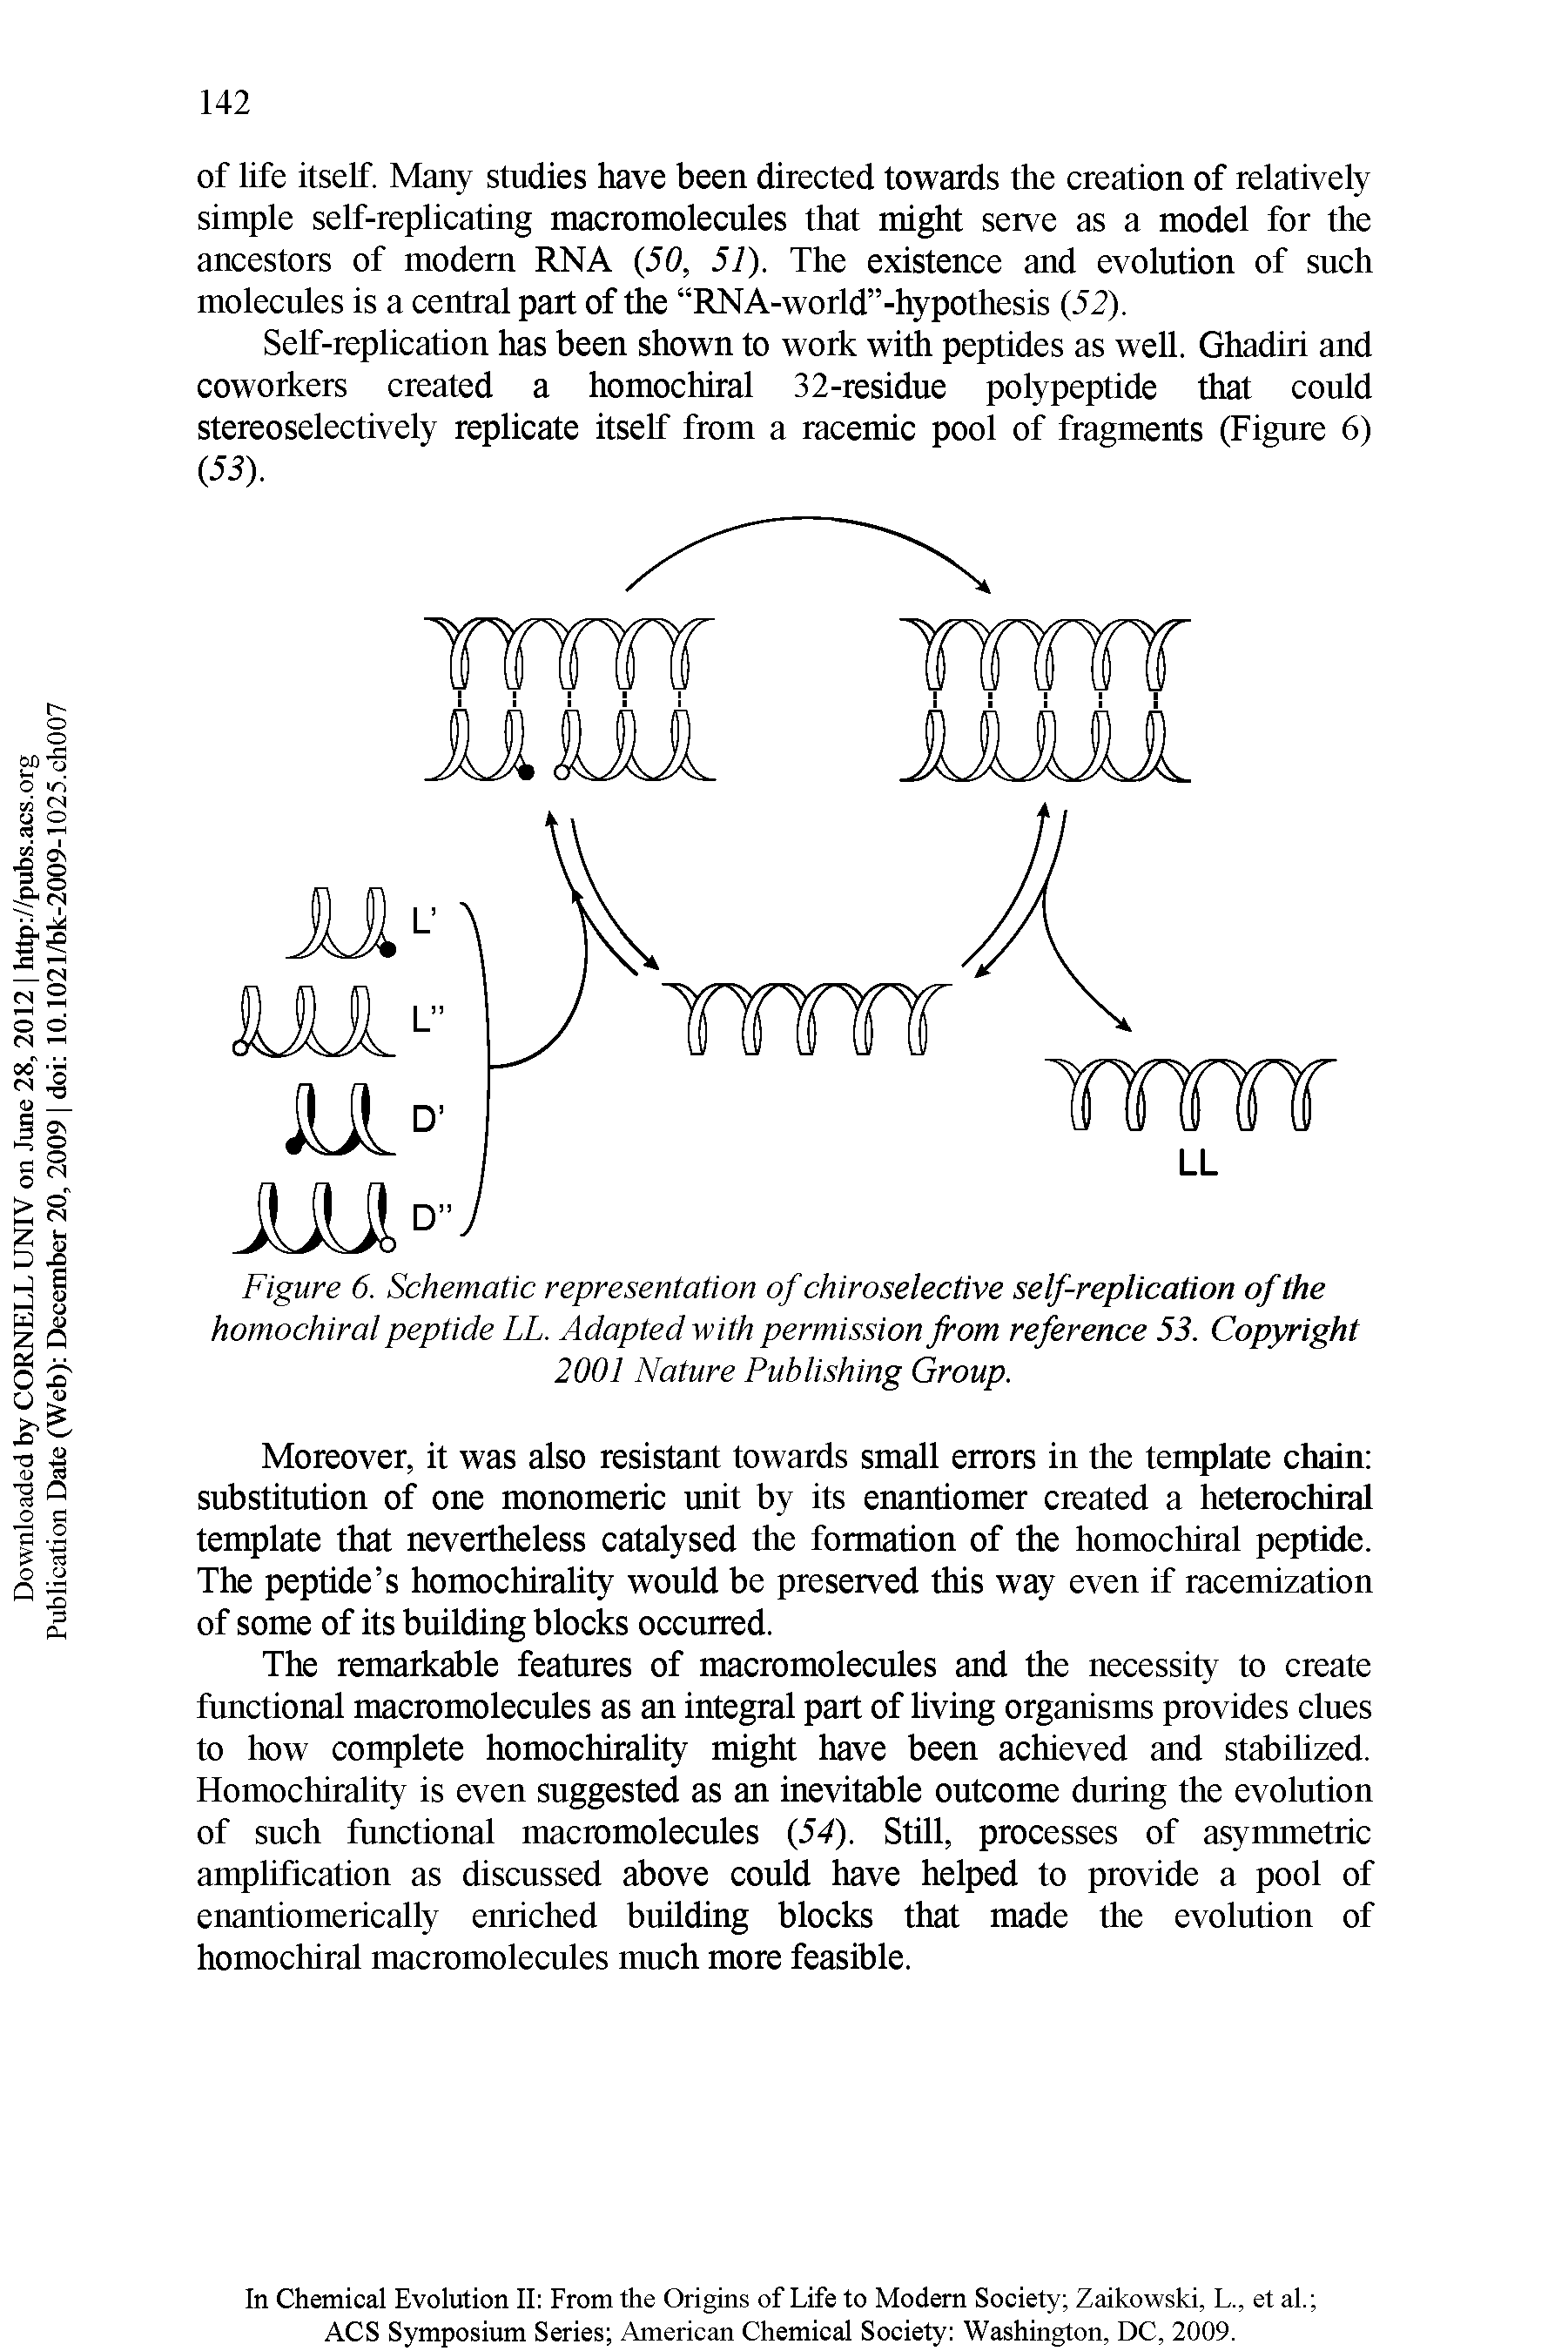 Figure 6. Schematic representation of chiroselective self-replication of the homochiral peptide LL. Adapted with permission from reference 53. Copyright 2001 Nature Publishing Group.